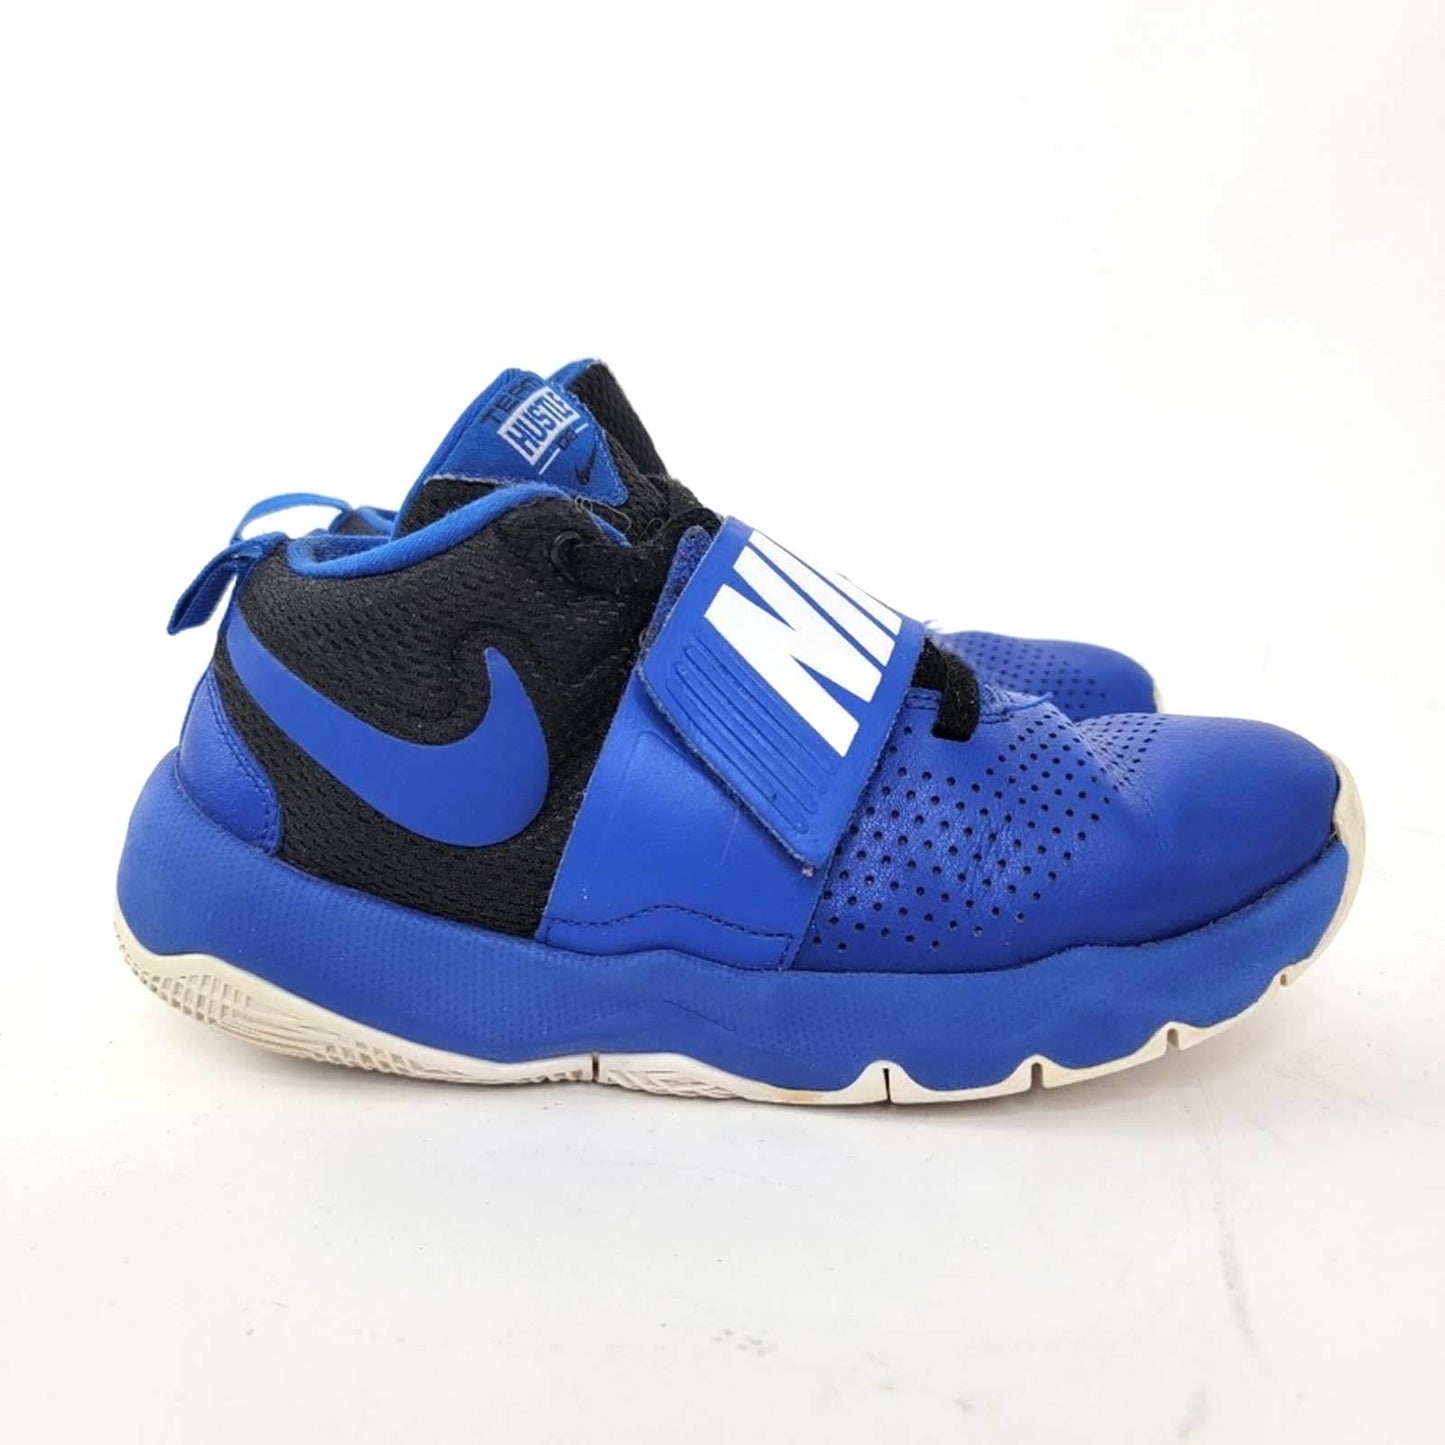 Nike Team Hustle D 8 (GS) Youth Athletic Shoes - 4Y